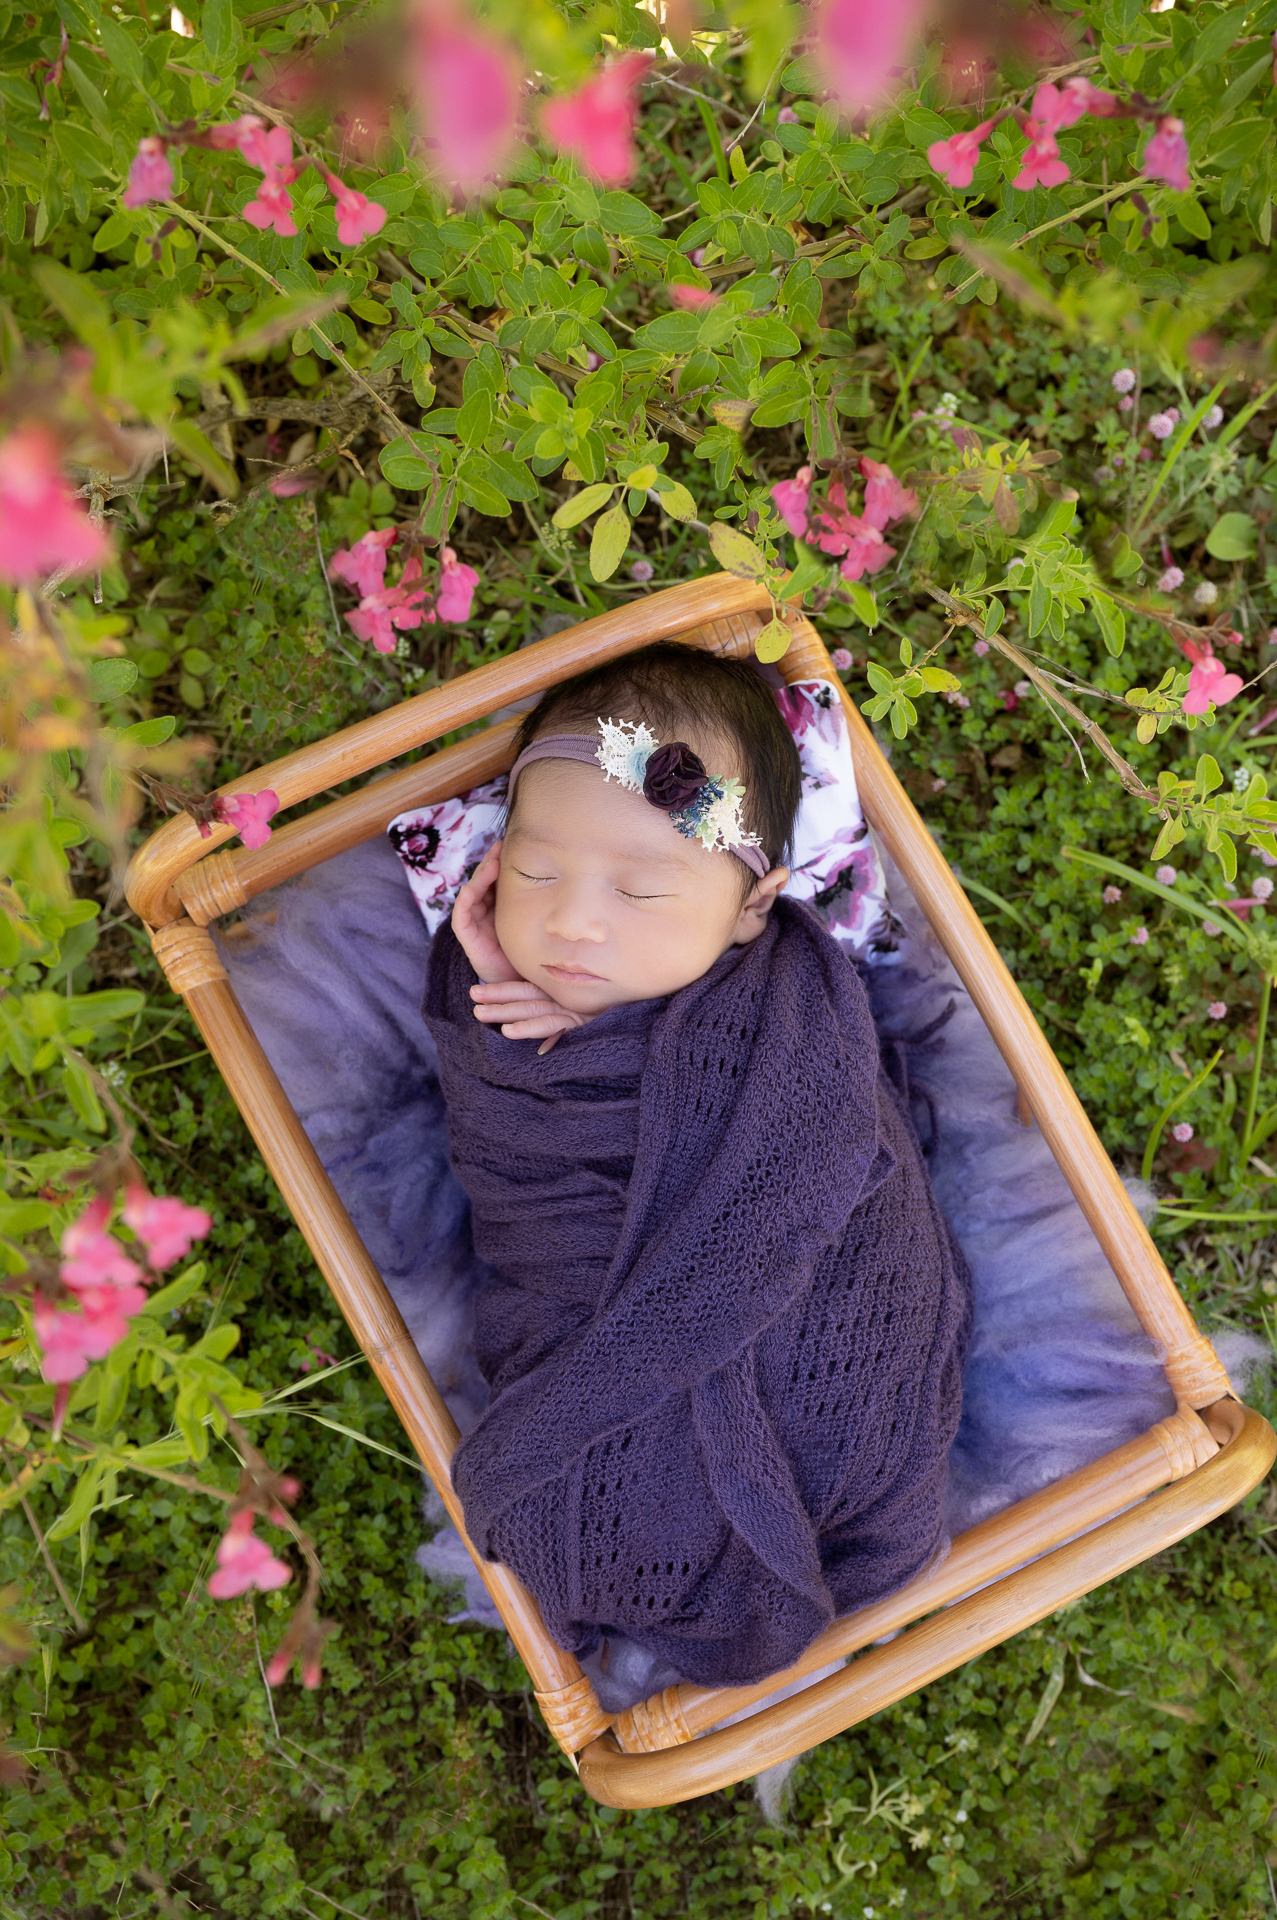 Newborn girl rests on prop outdoors, wears purple headband and purple wrap. Pink flowers and grass decorating the scene. 90 degrees angle shot.